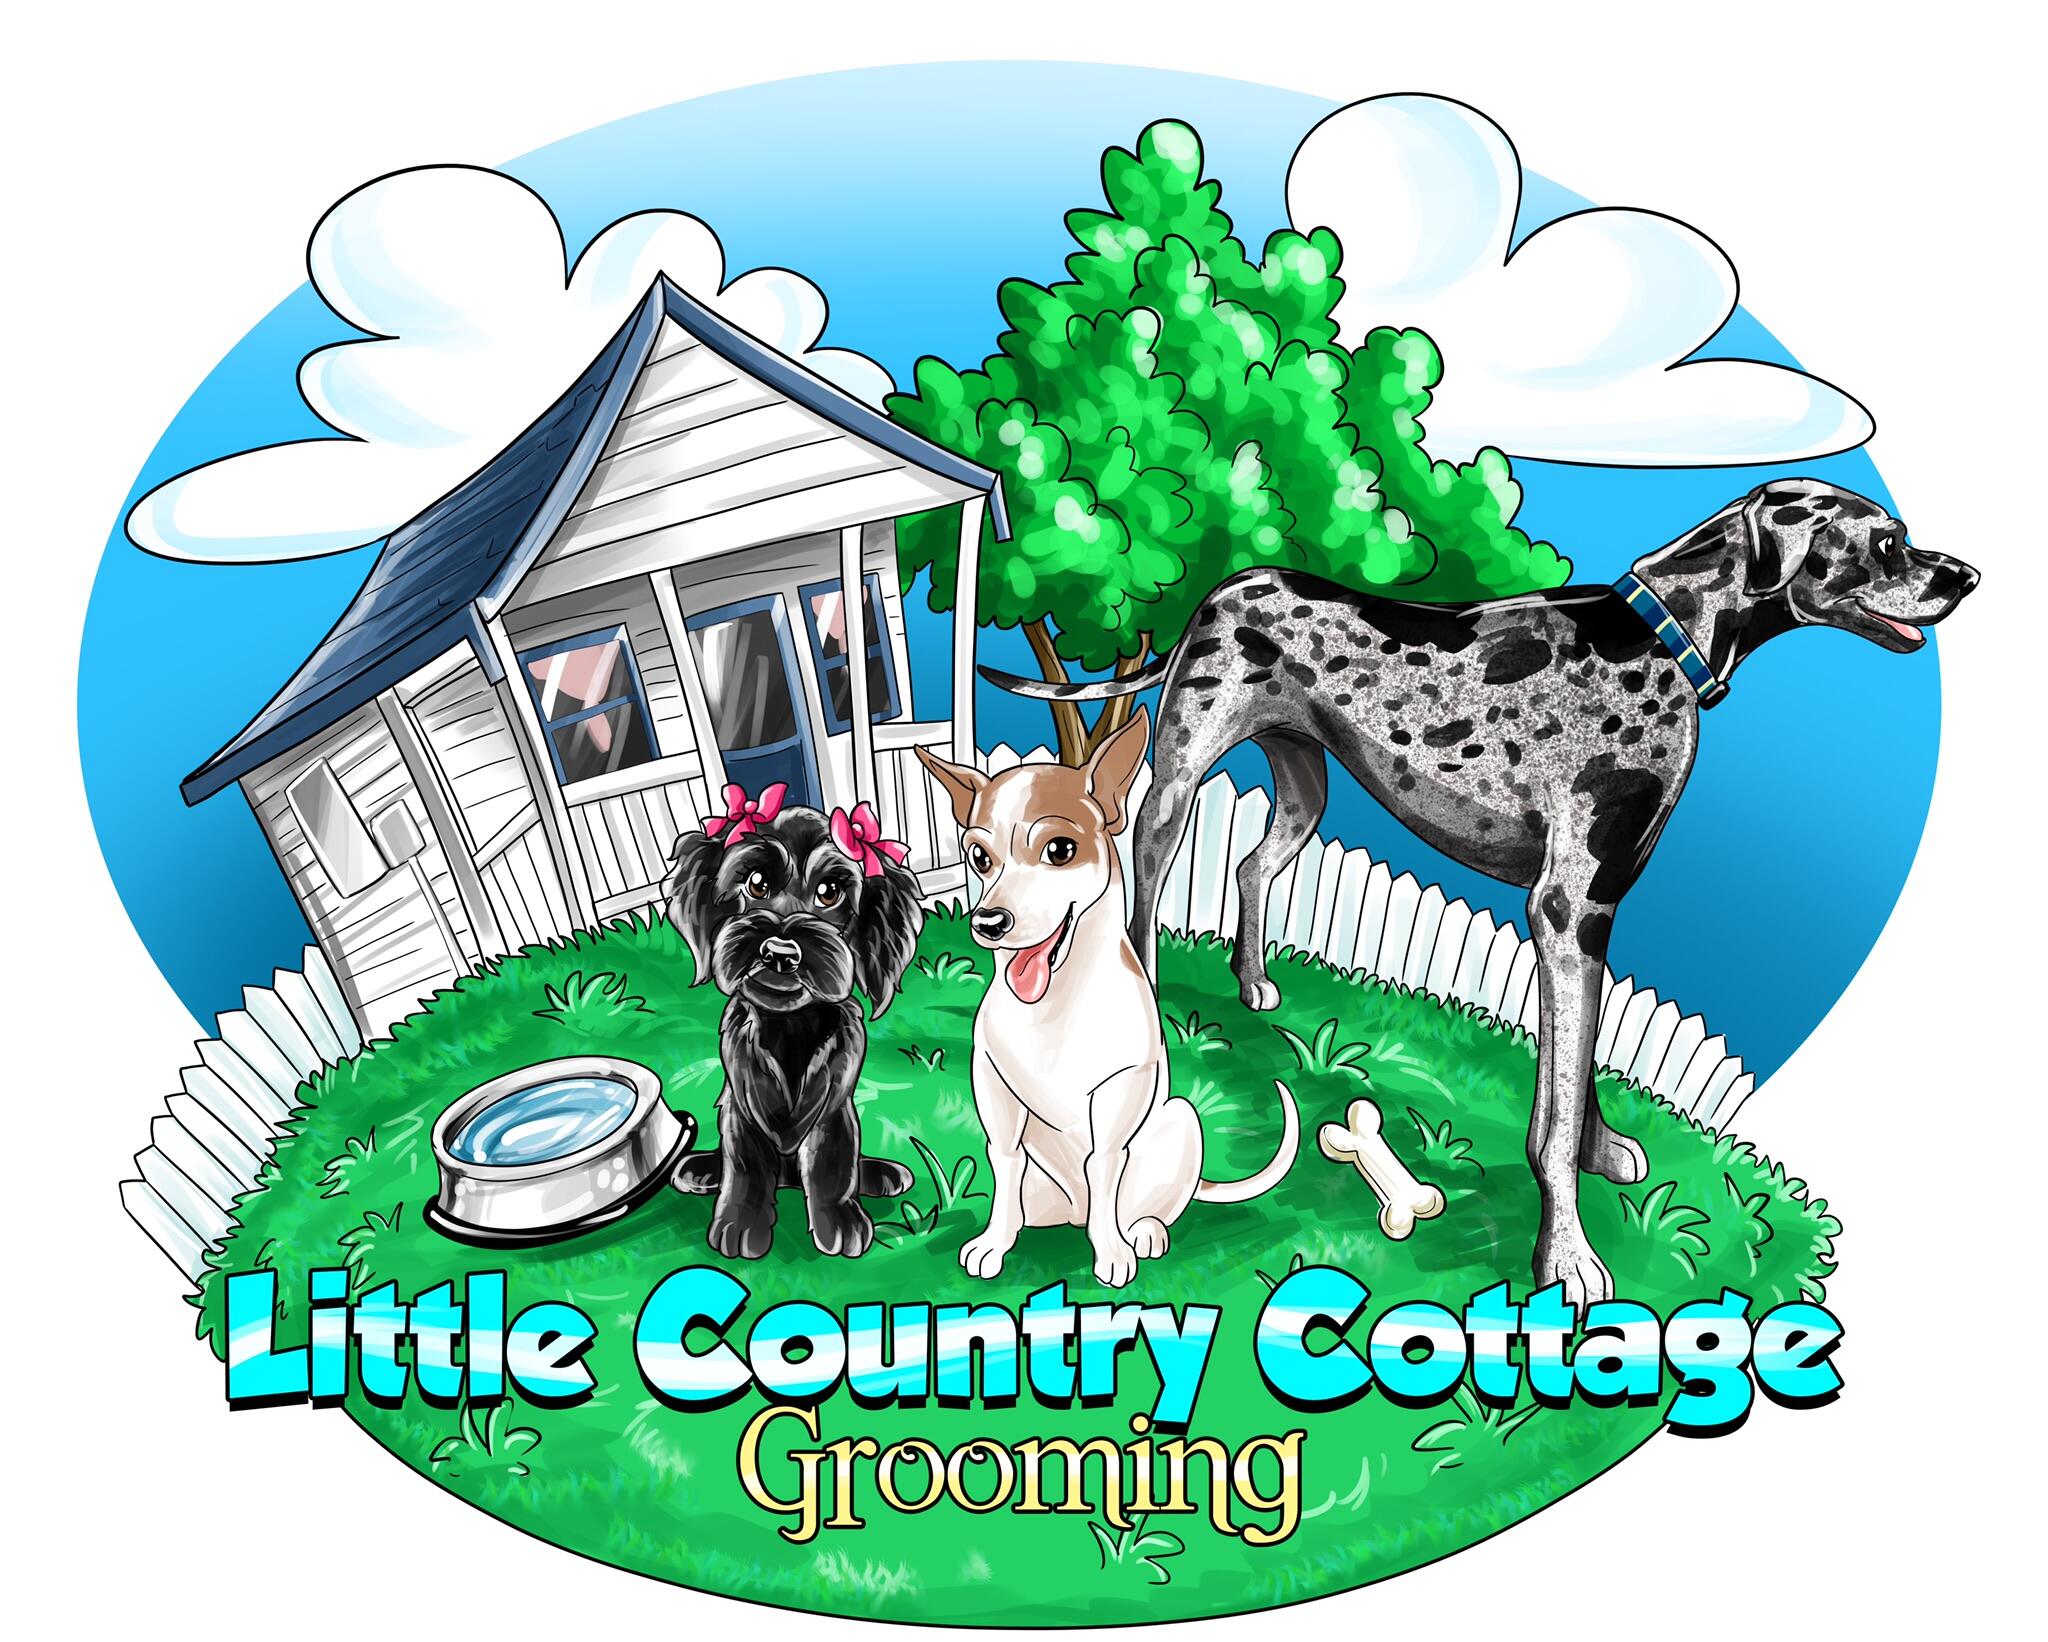 Little country Cottage Grooming